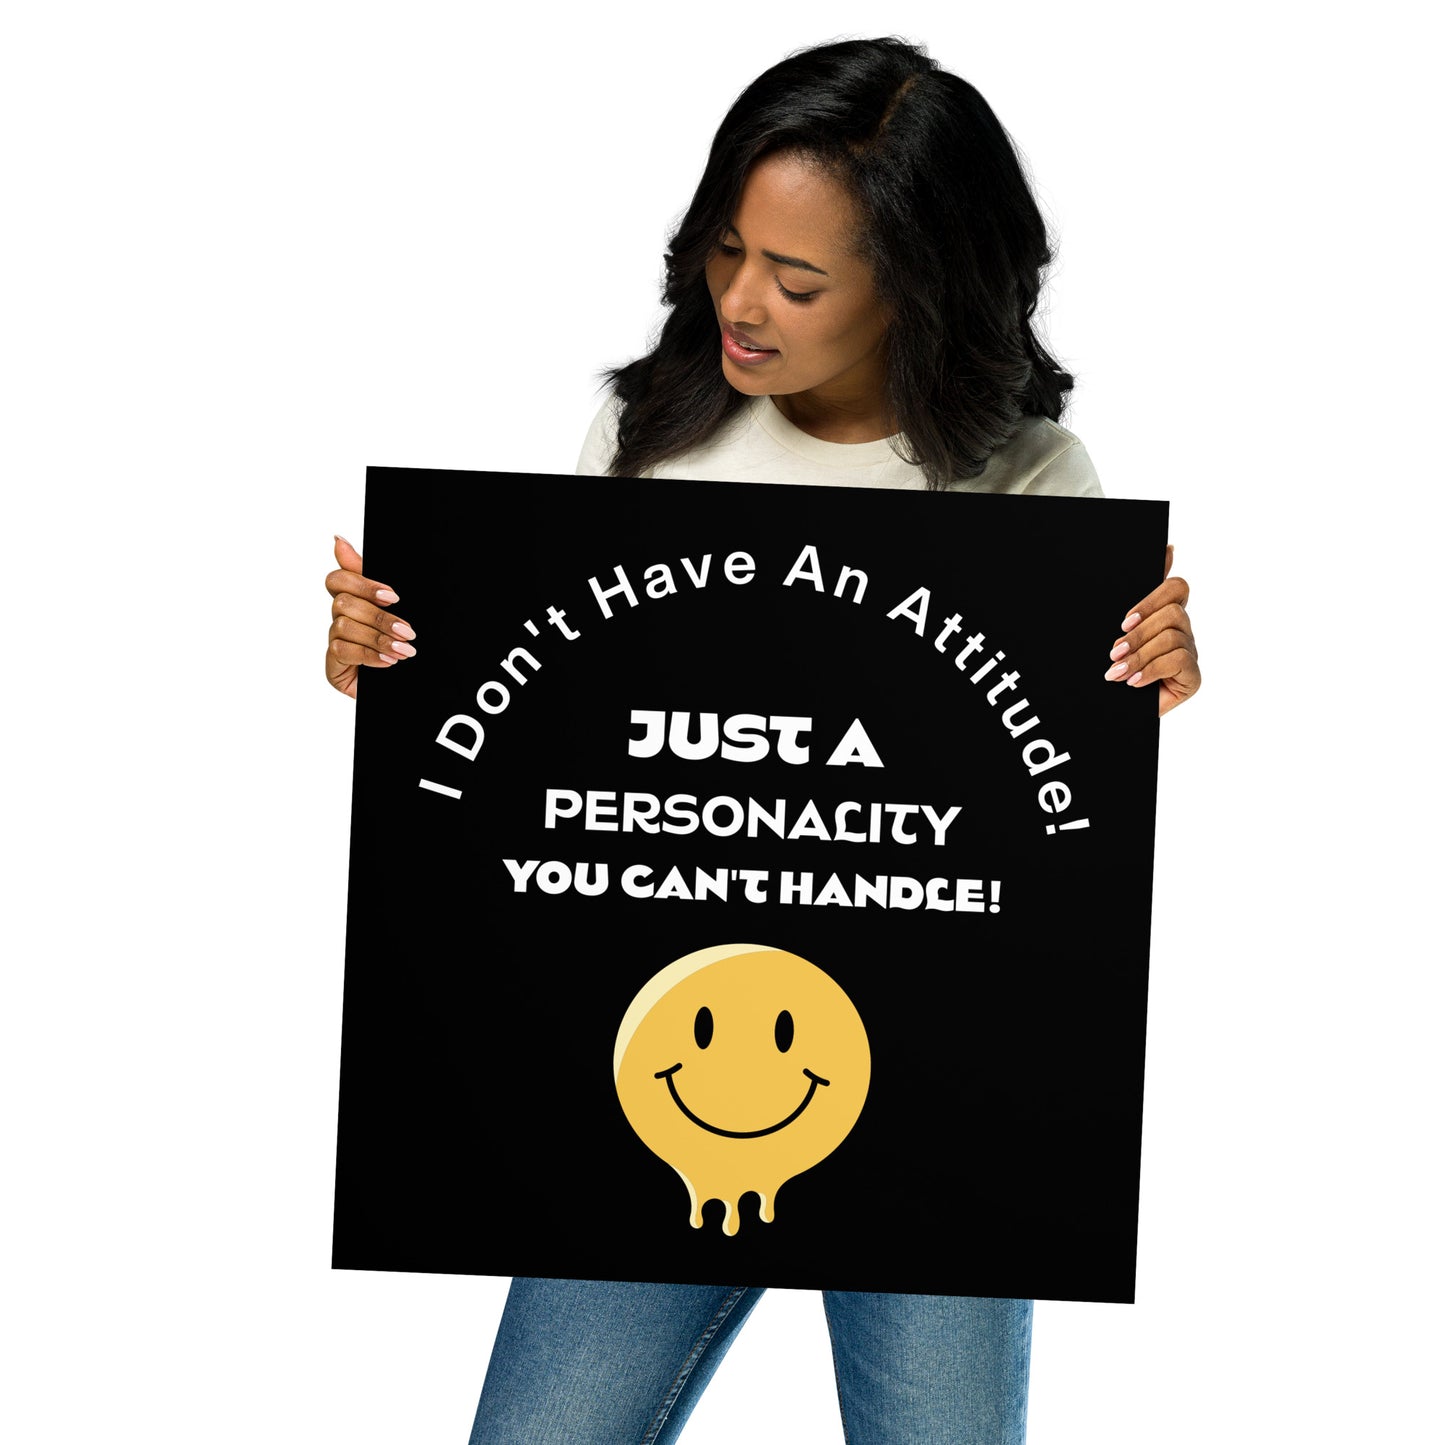 I Don't Have An Attitude! Just A Personality You Can't Handle Poster